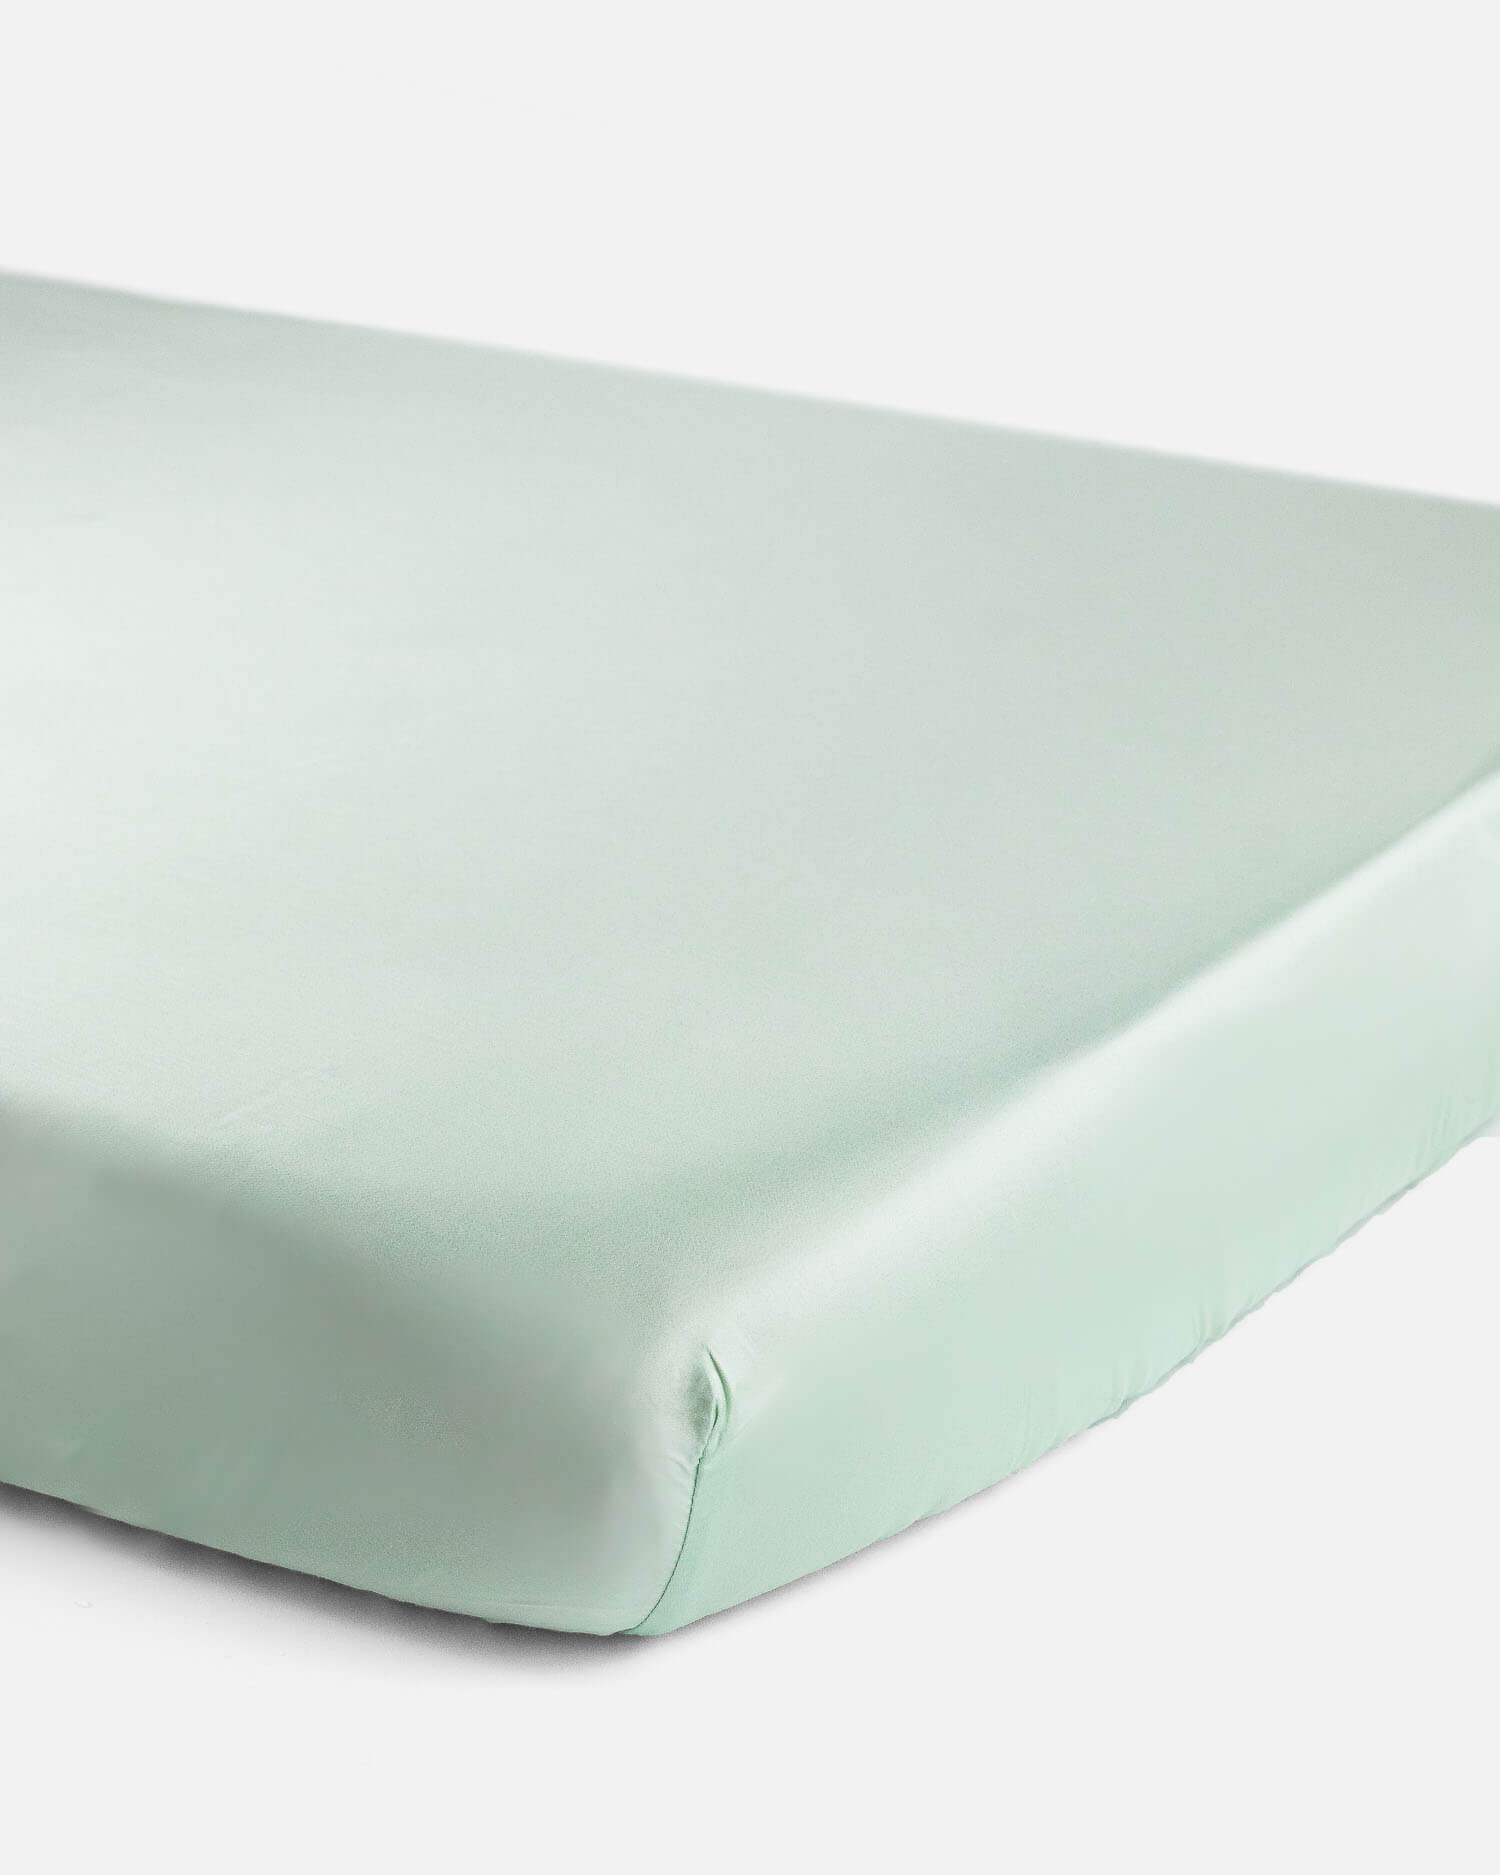 ava and ava ph organic bamboo lyocell baby bedding - crib sheet fitted sheet for wooden crib or playpen. breathable soft. theasianparent awards philippines best crib sheets in mint green